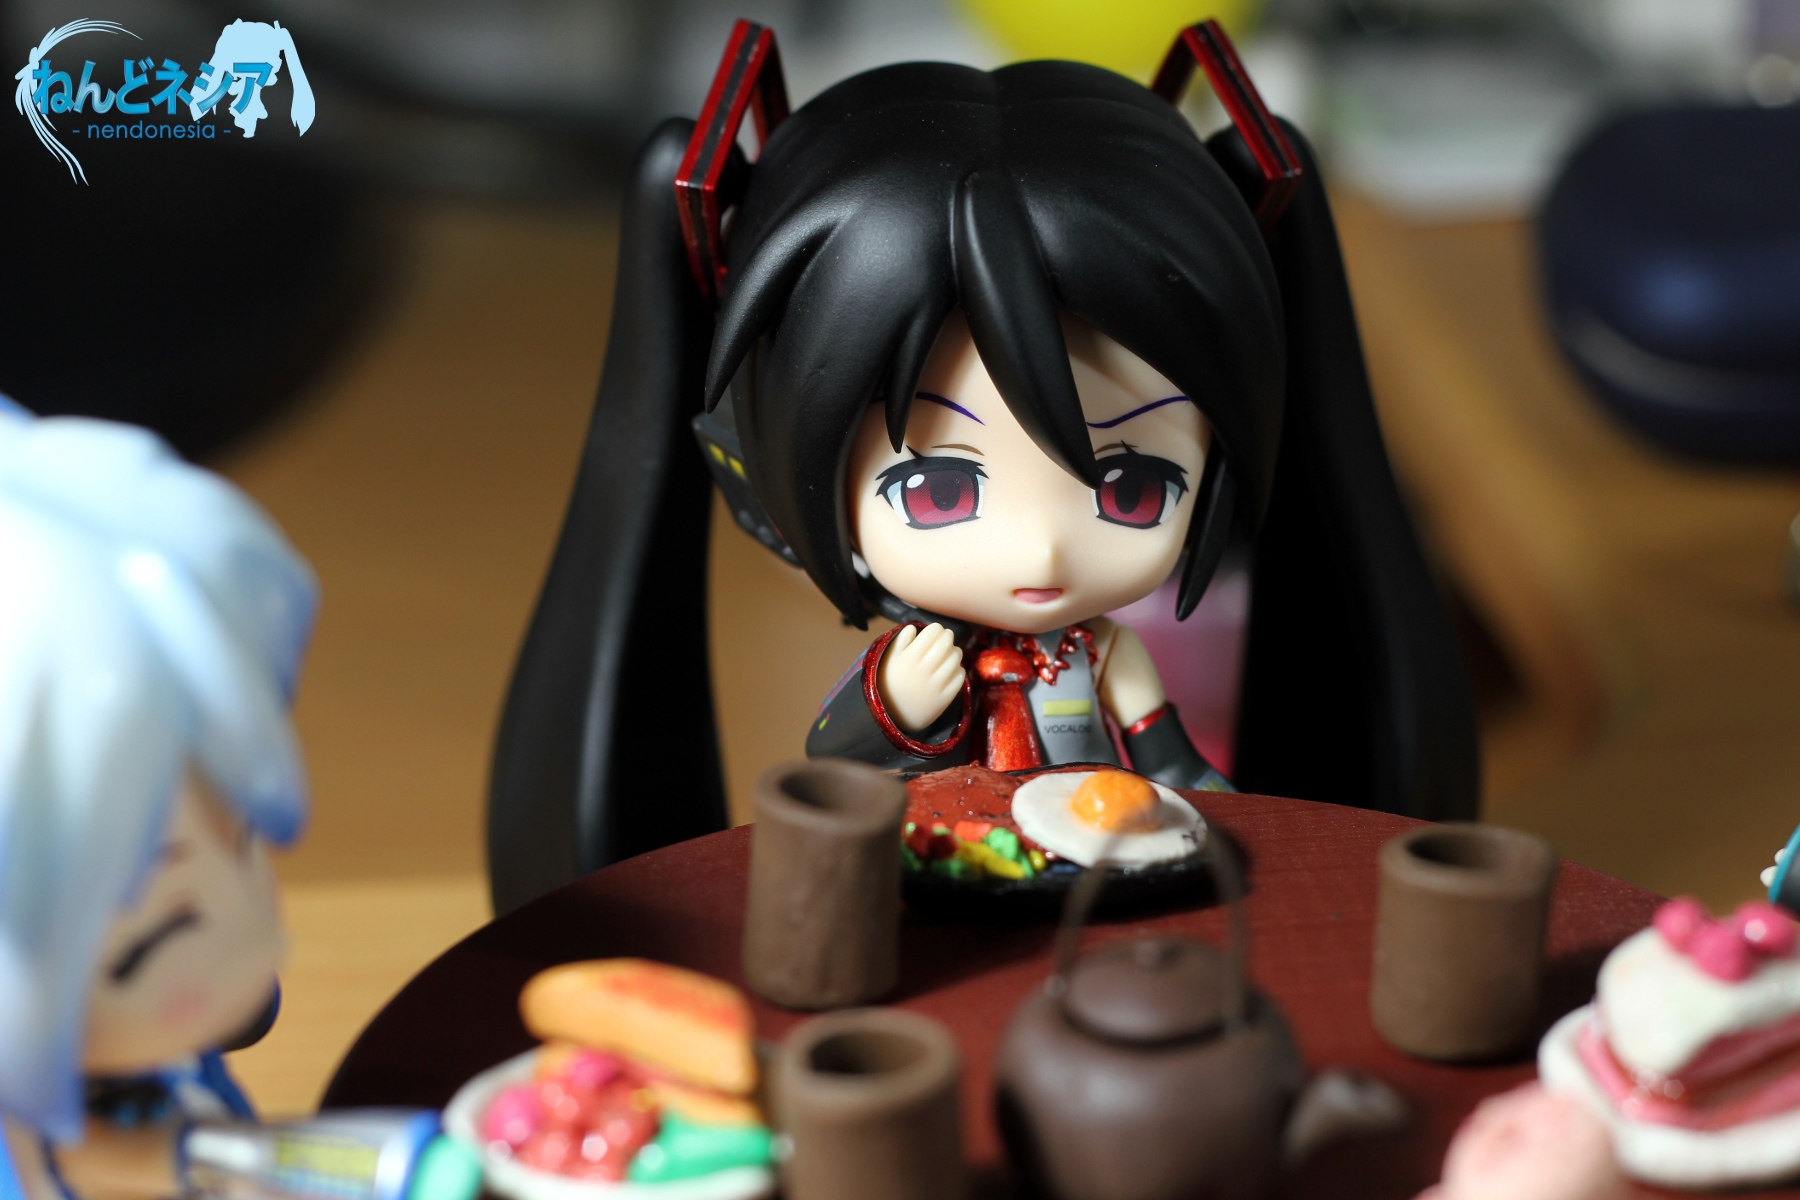 an anime figurine sitting next to several small plates